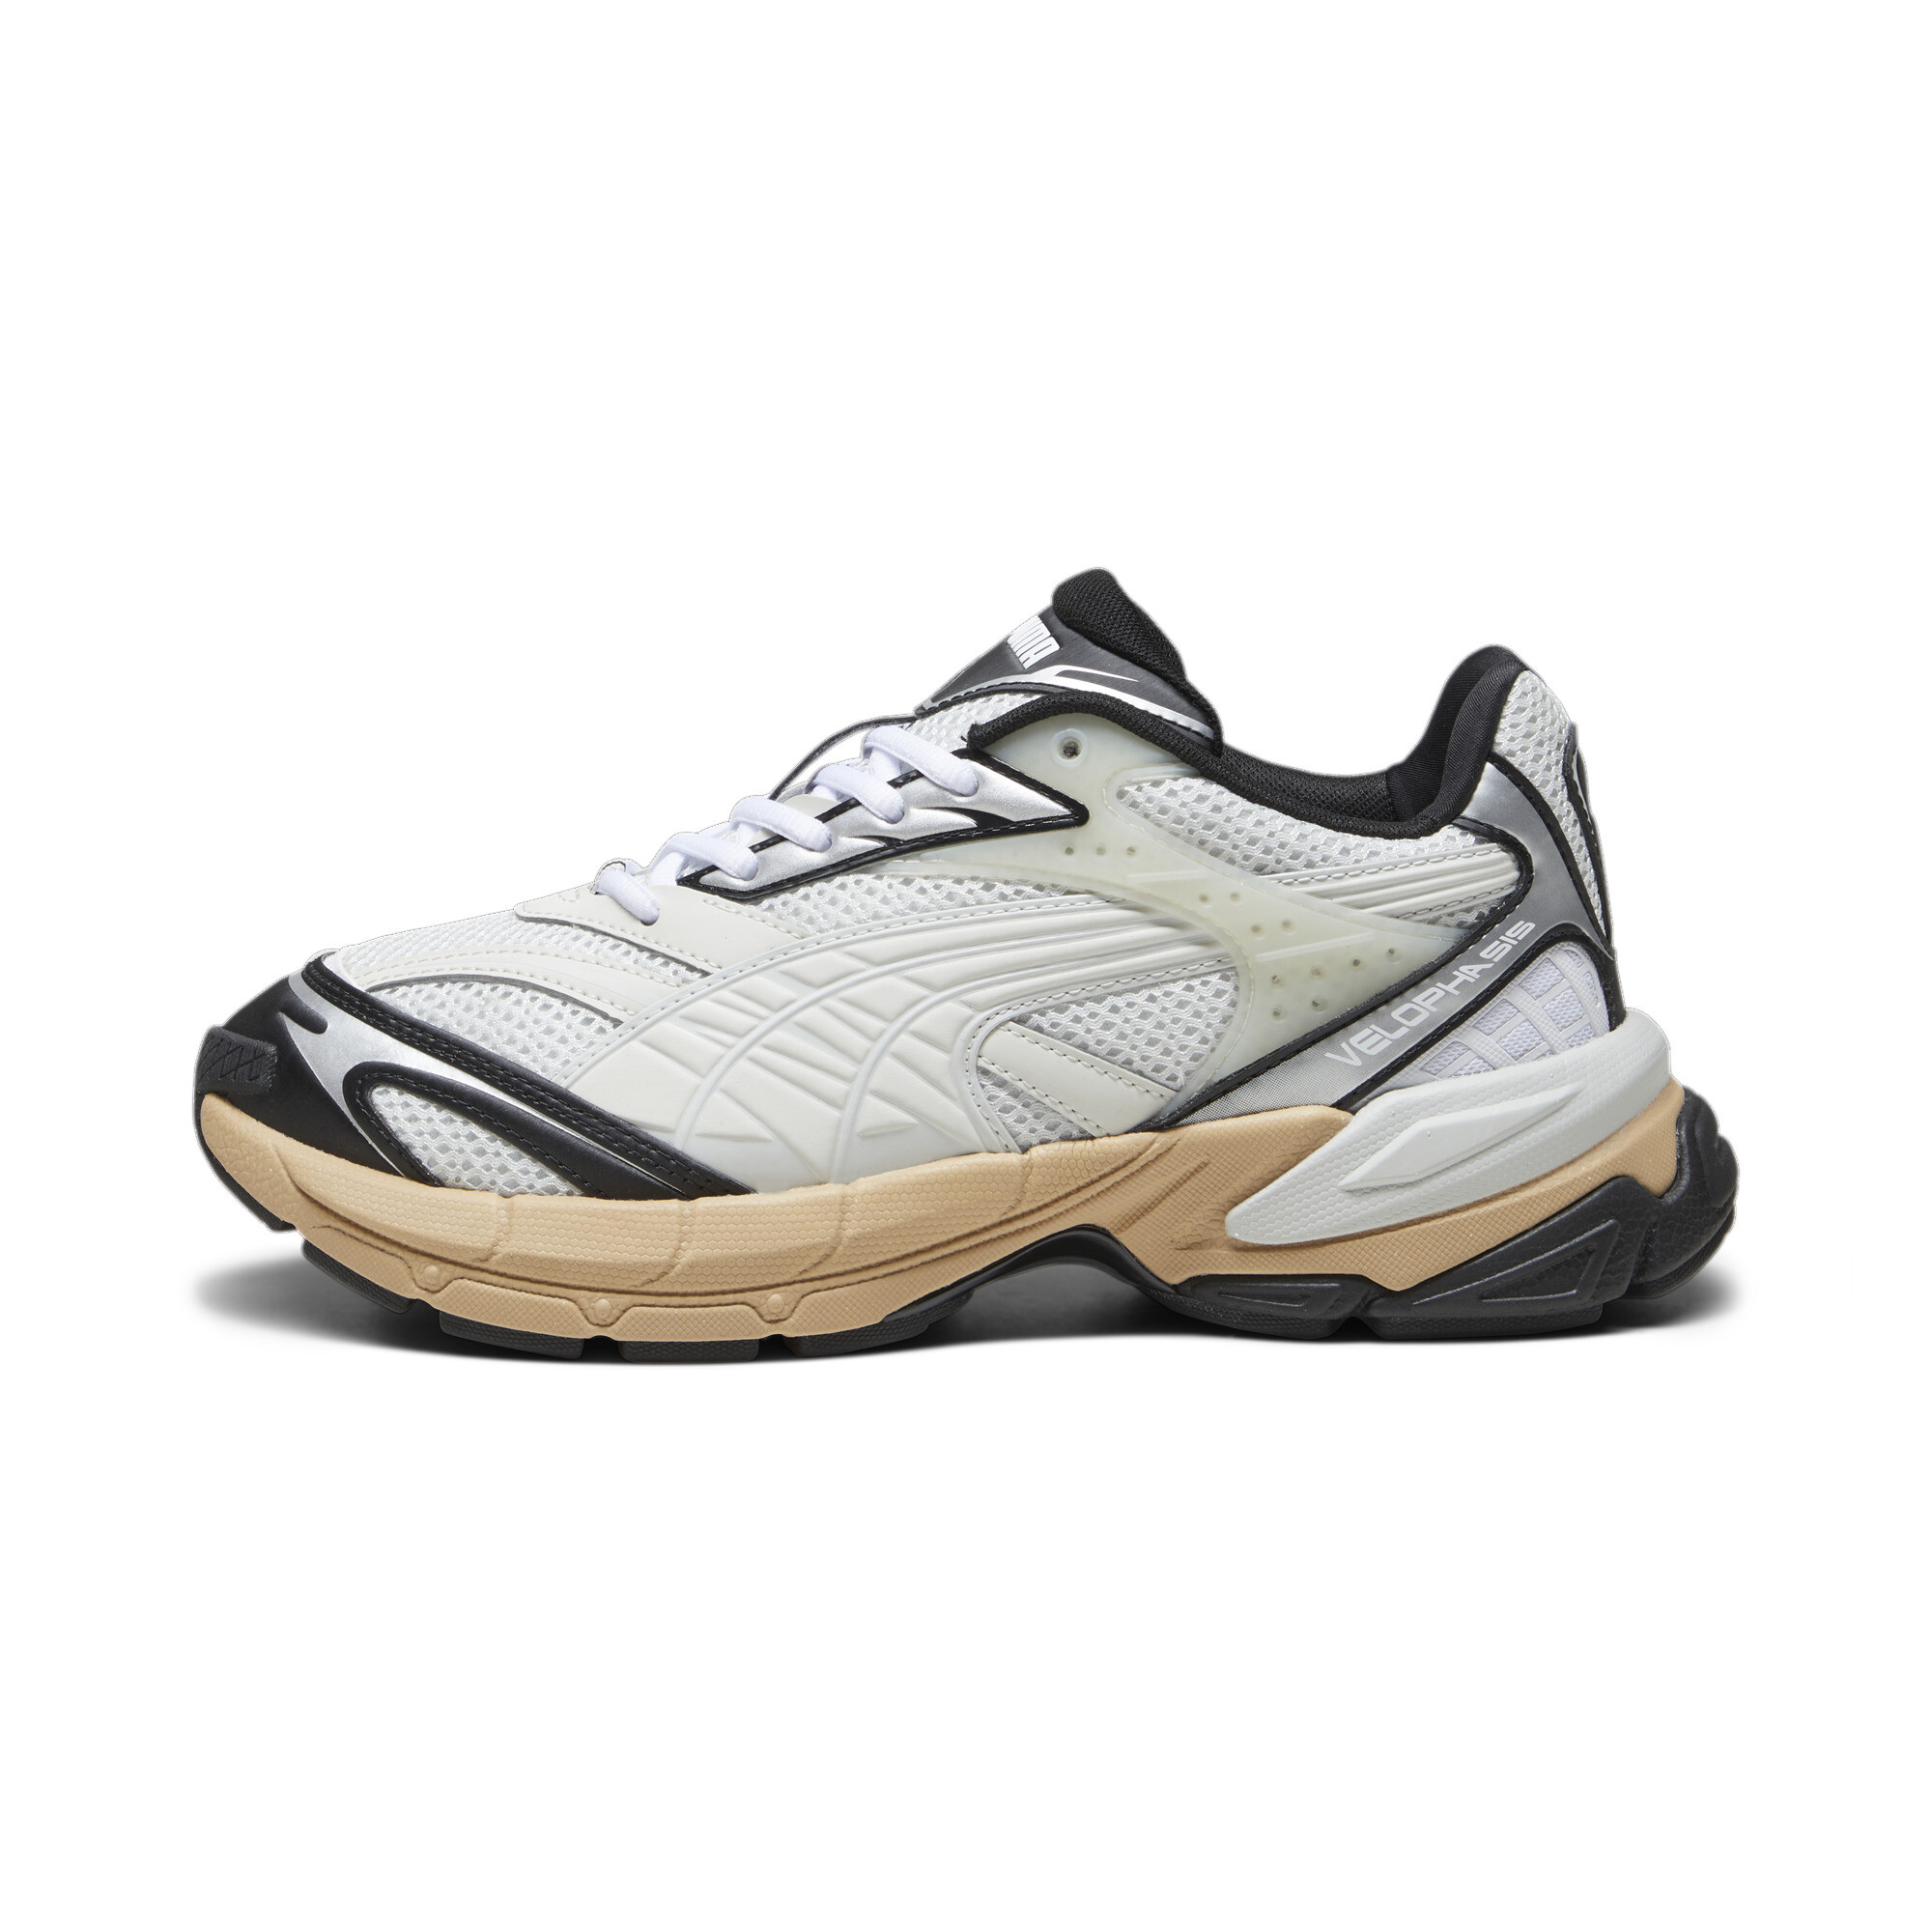 Puma Velophasis Technisch Sneakers, Gray, Size 48, Shoes